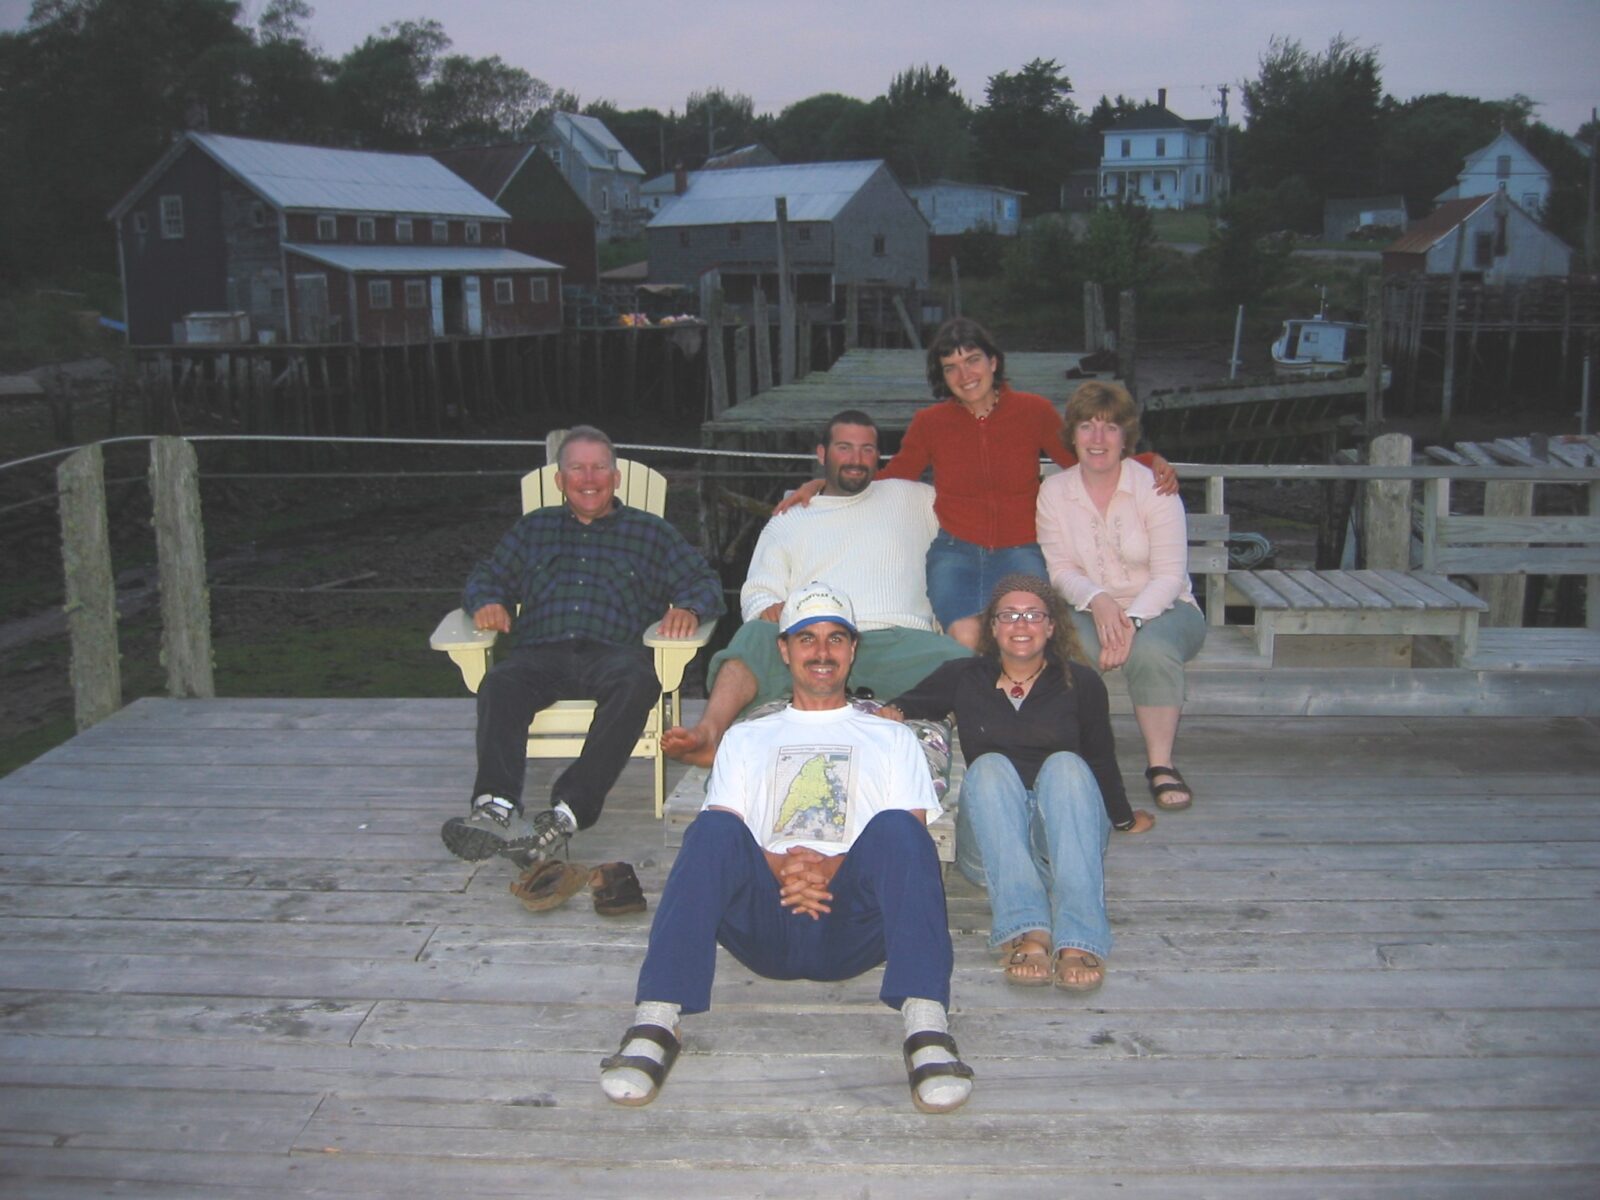 A group of people posing on a wooden deck.